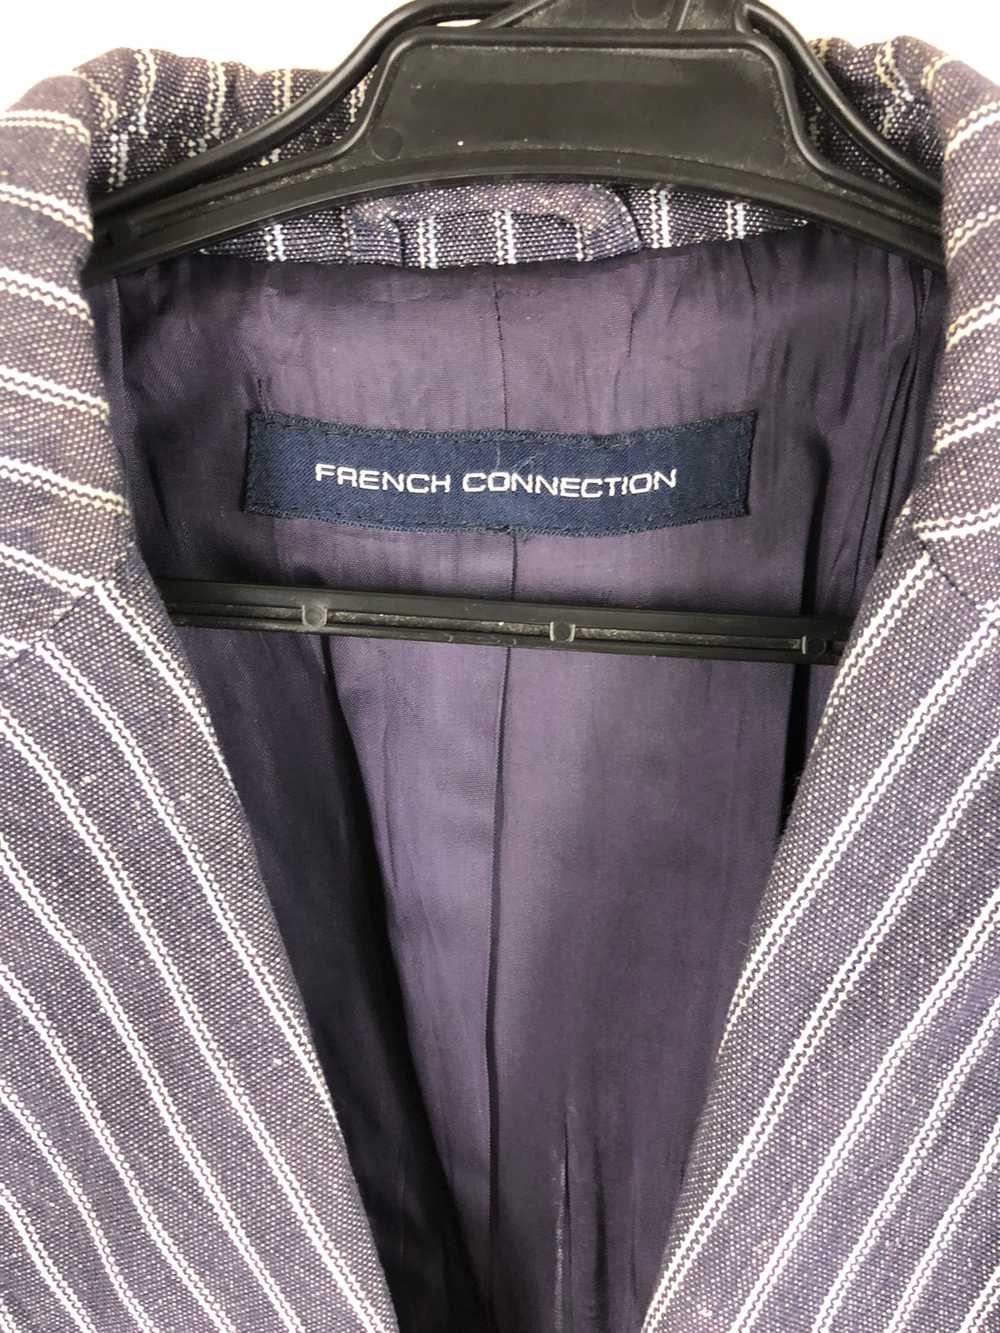 French Connection - FRENCH CONNENTION LINEN COTTO… - image 5